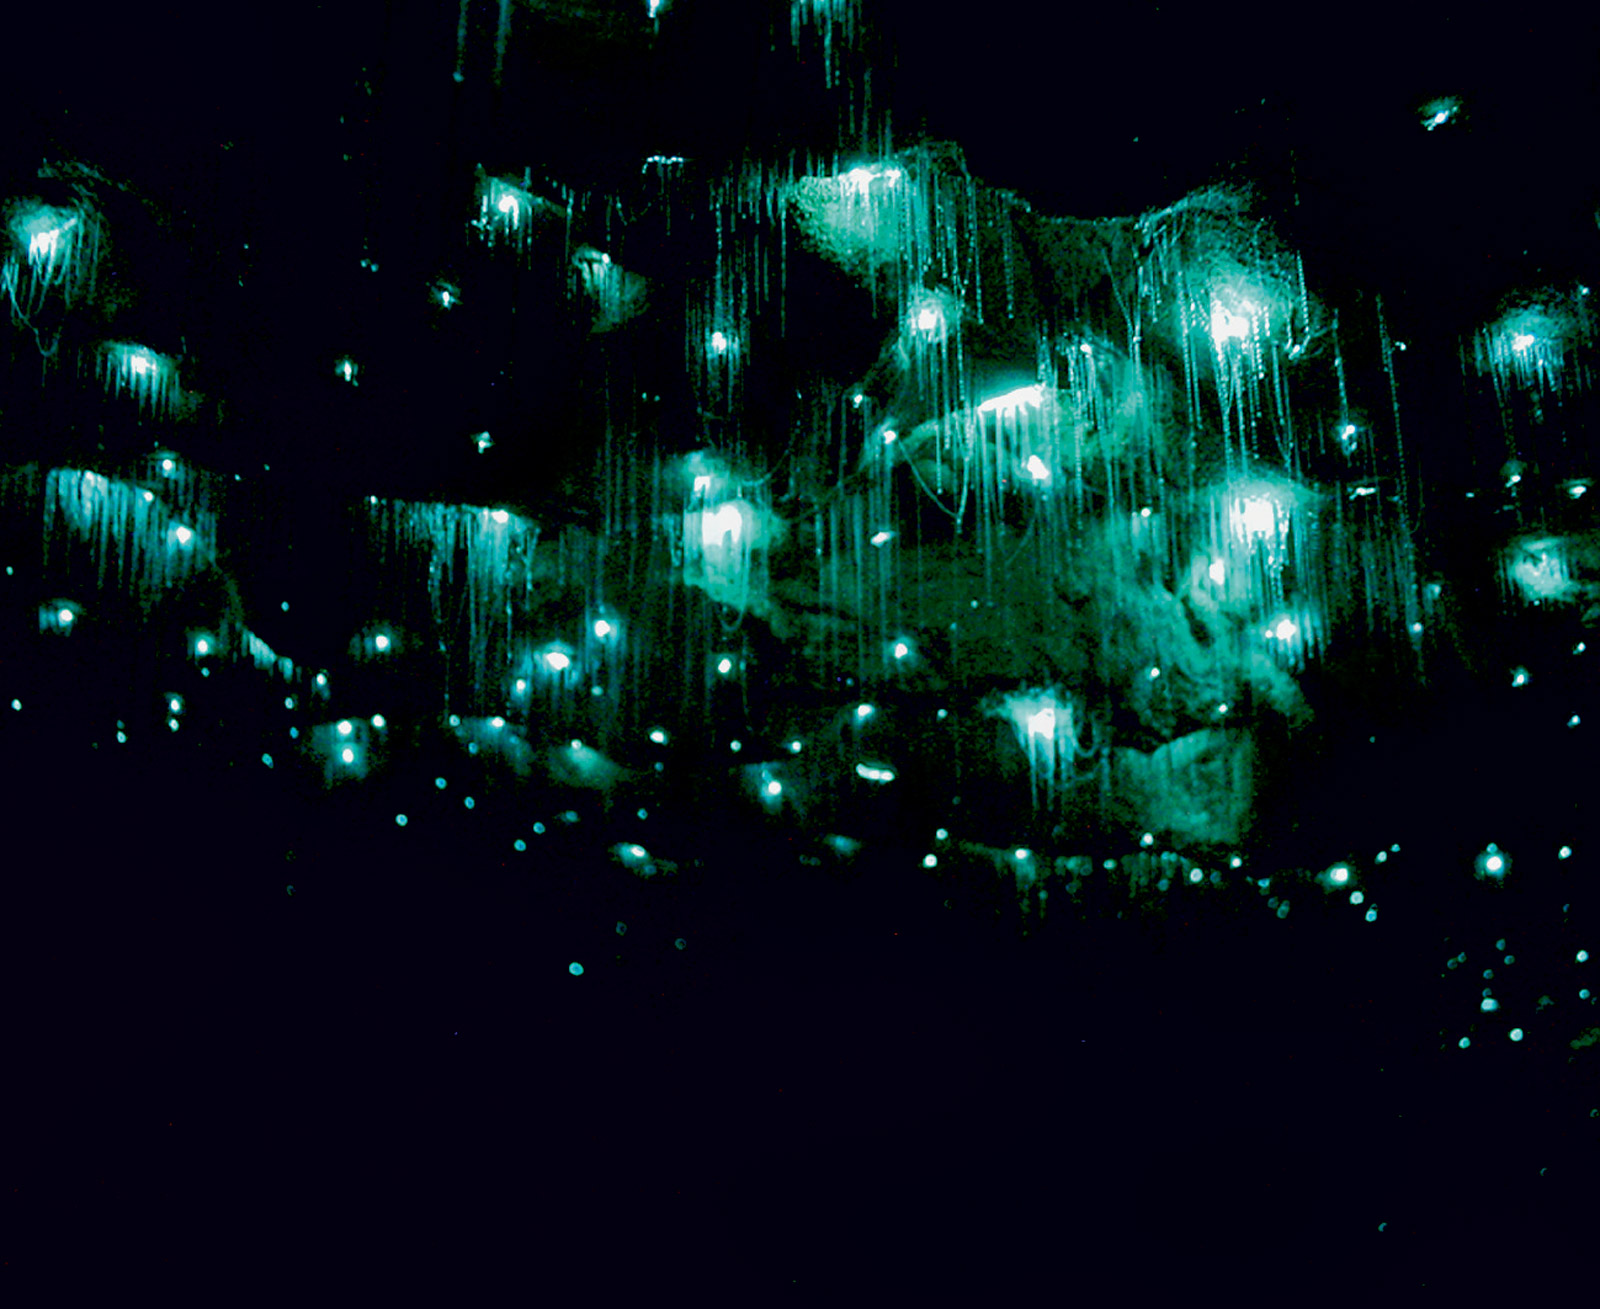 A postcard depicting a photograph of Glowworm Grotto, Waitomo Cave, New Zealand, a cave with glowing thread-like forms hanging from the ceiling.